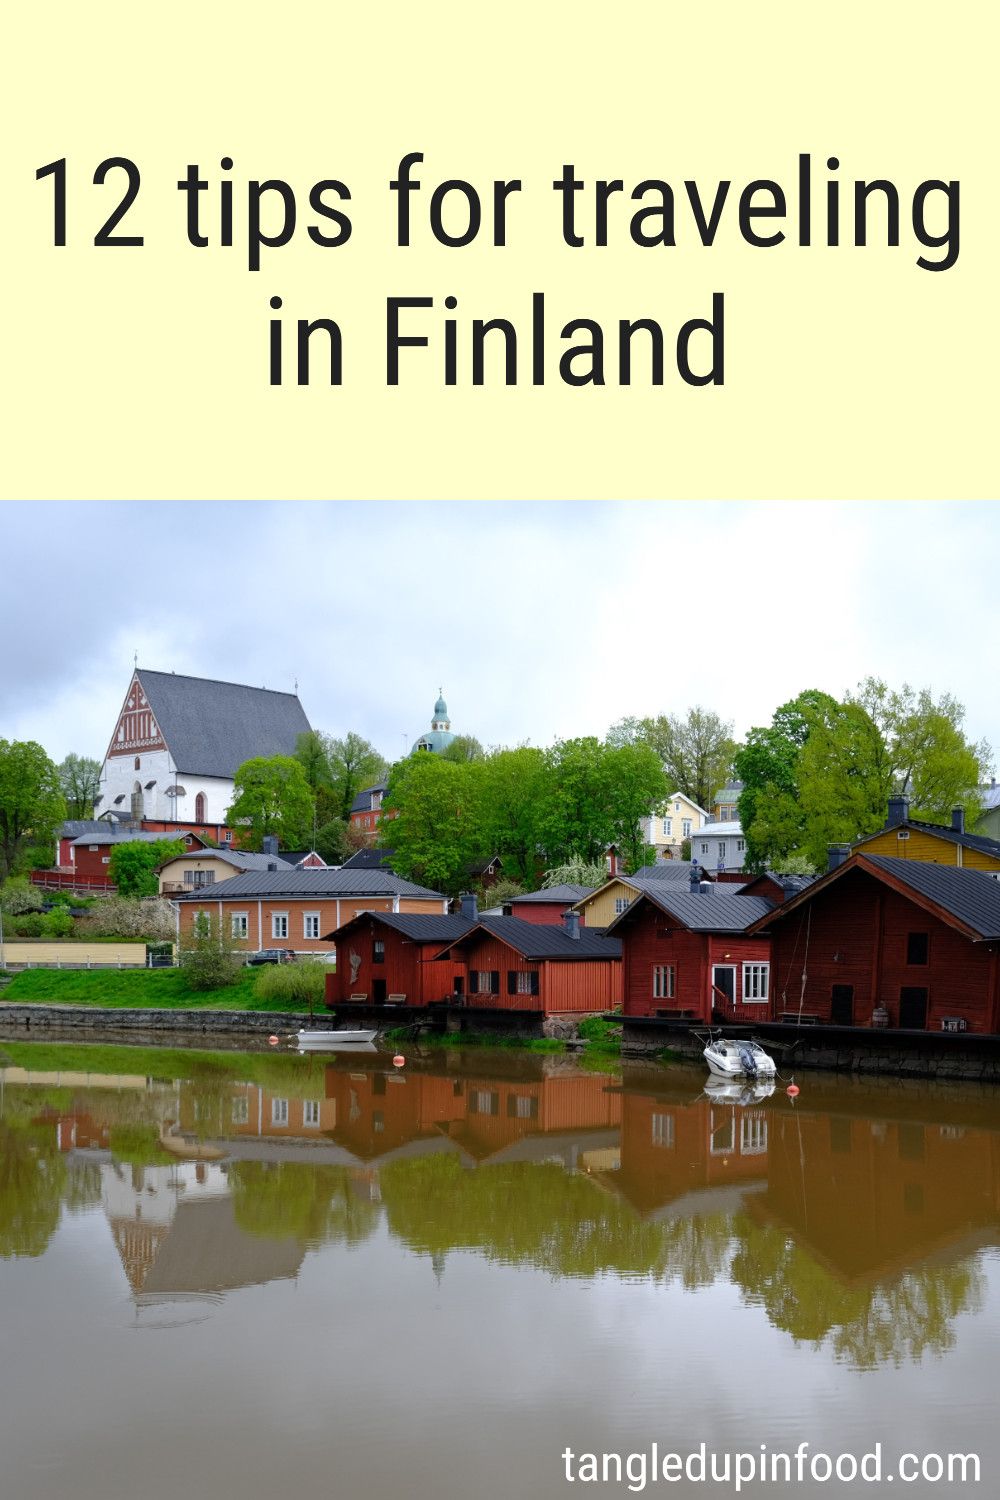 Photo wooden buildings along a river with text reading "12 tips for traveling in Finland"